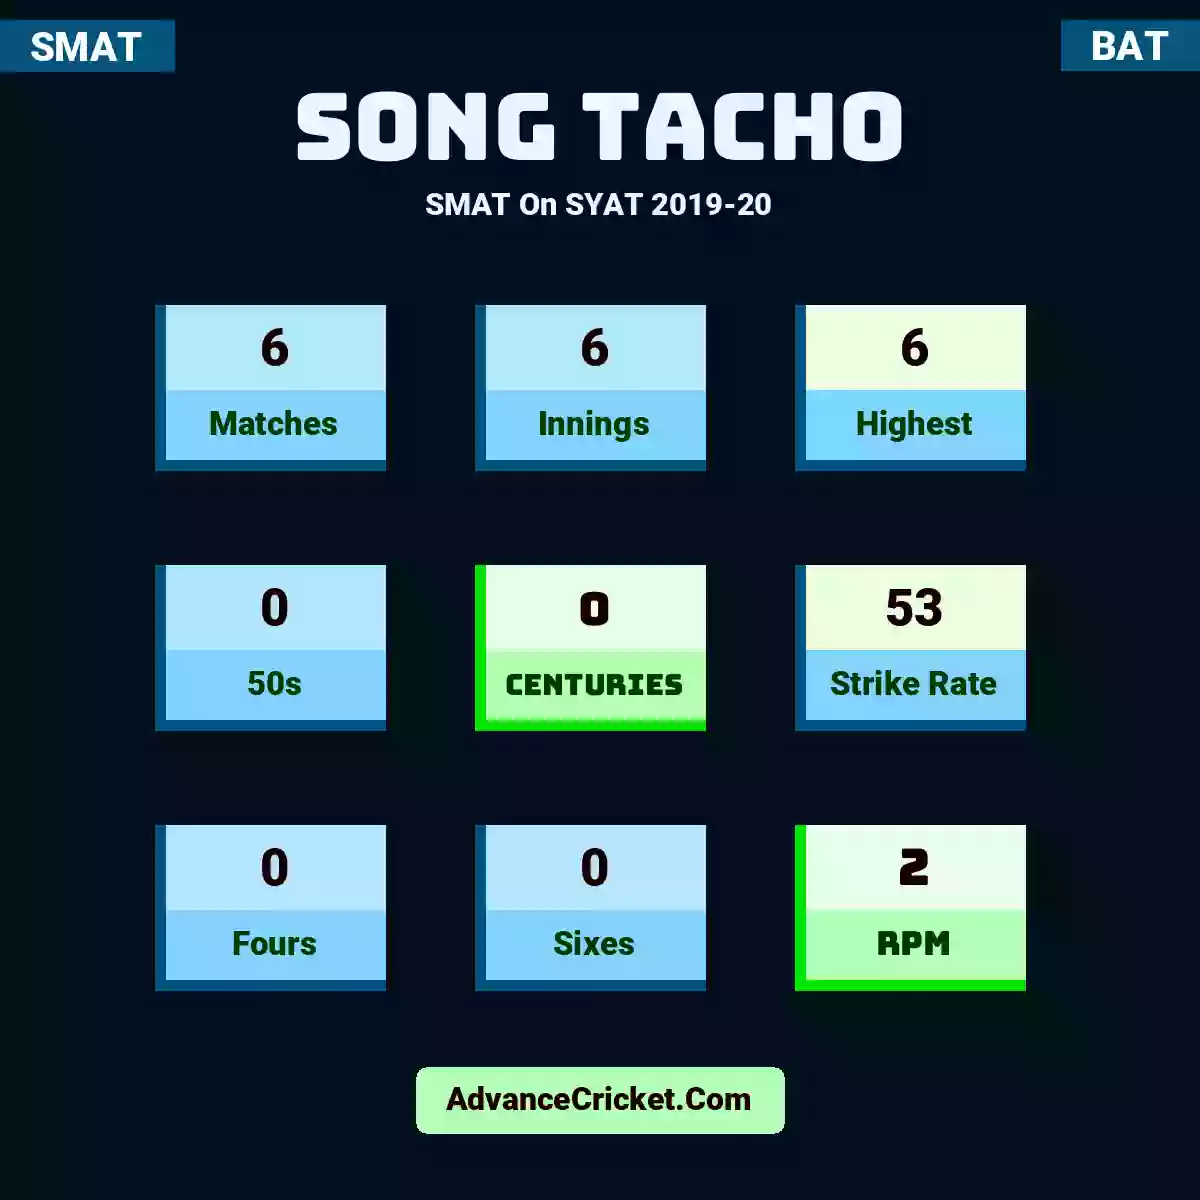 Song Tacho SMAT  On SYAT 2019-20, Song Tacho played 6 matches, scored 6 runs as highest, 0 half-centuries, and 0 centuries, with a strike rate of 53. S.Tacho hit 0 fours and 0 sixes, with an RPM of 2.